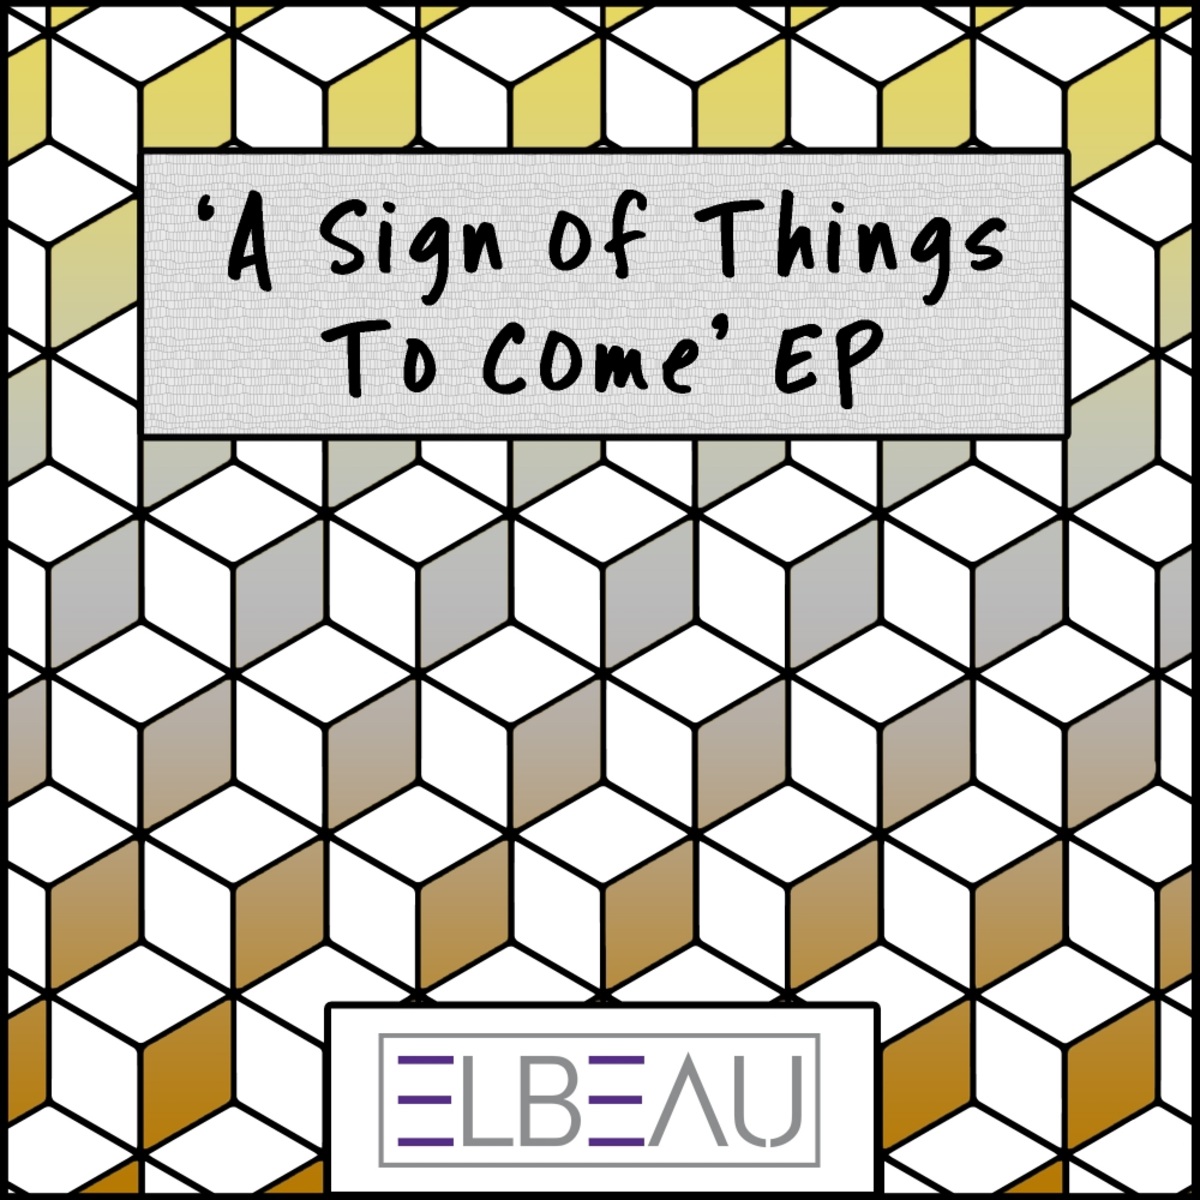 ElBeau - A Sign Of Things To Come EP / ELBEAU Records